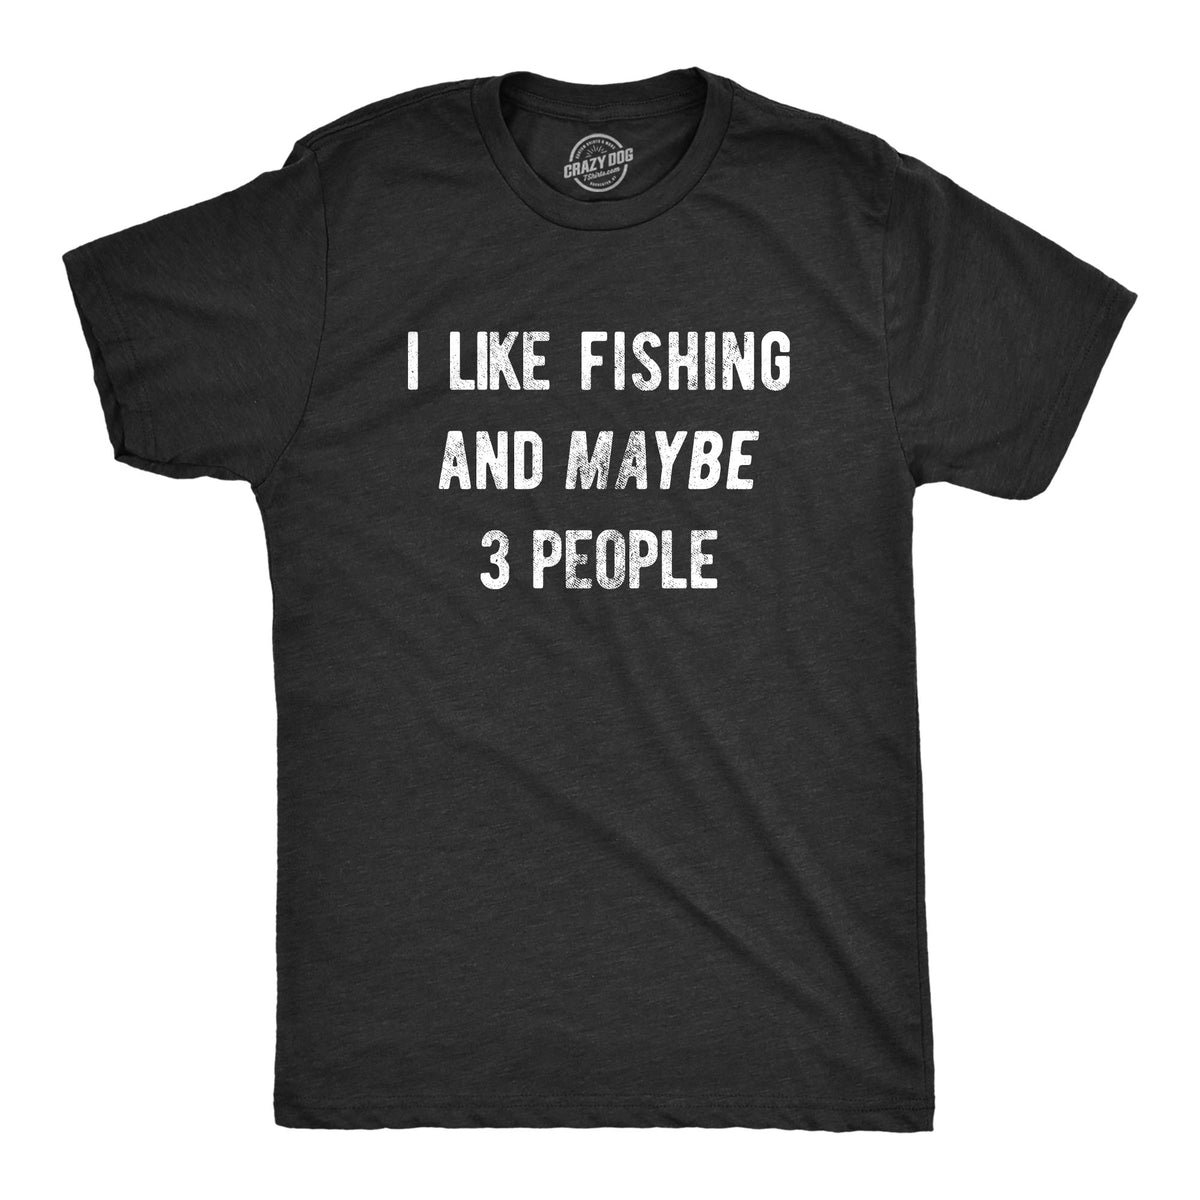 Mens I Like Fishing and Maybe 3 People Tshirt Funny Outdoorsman Father - 3XL